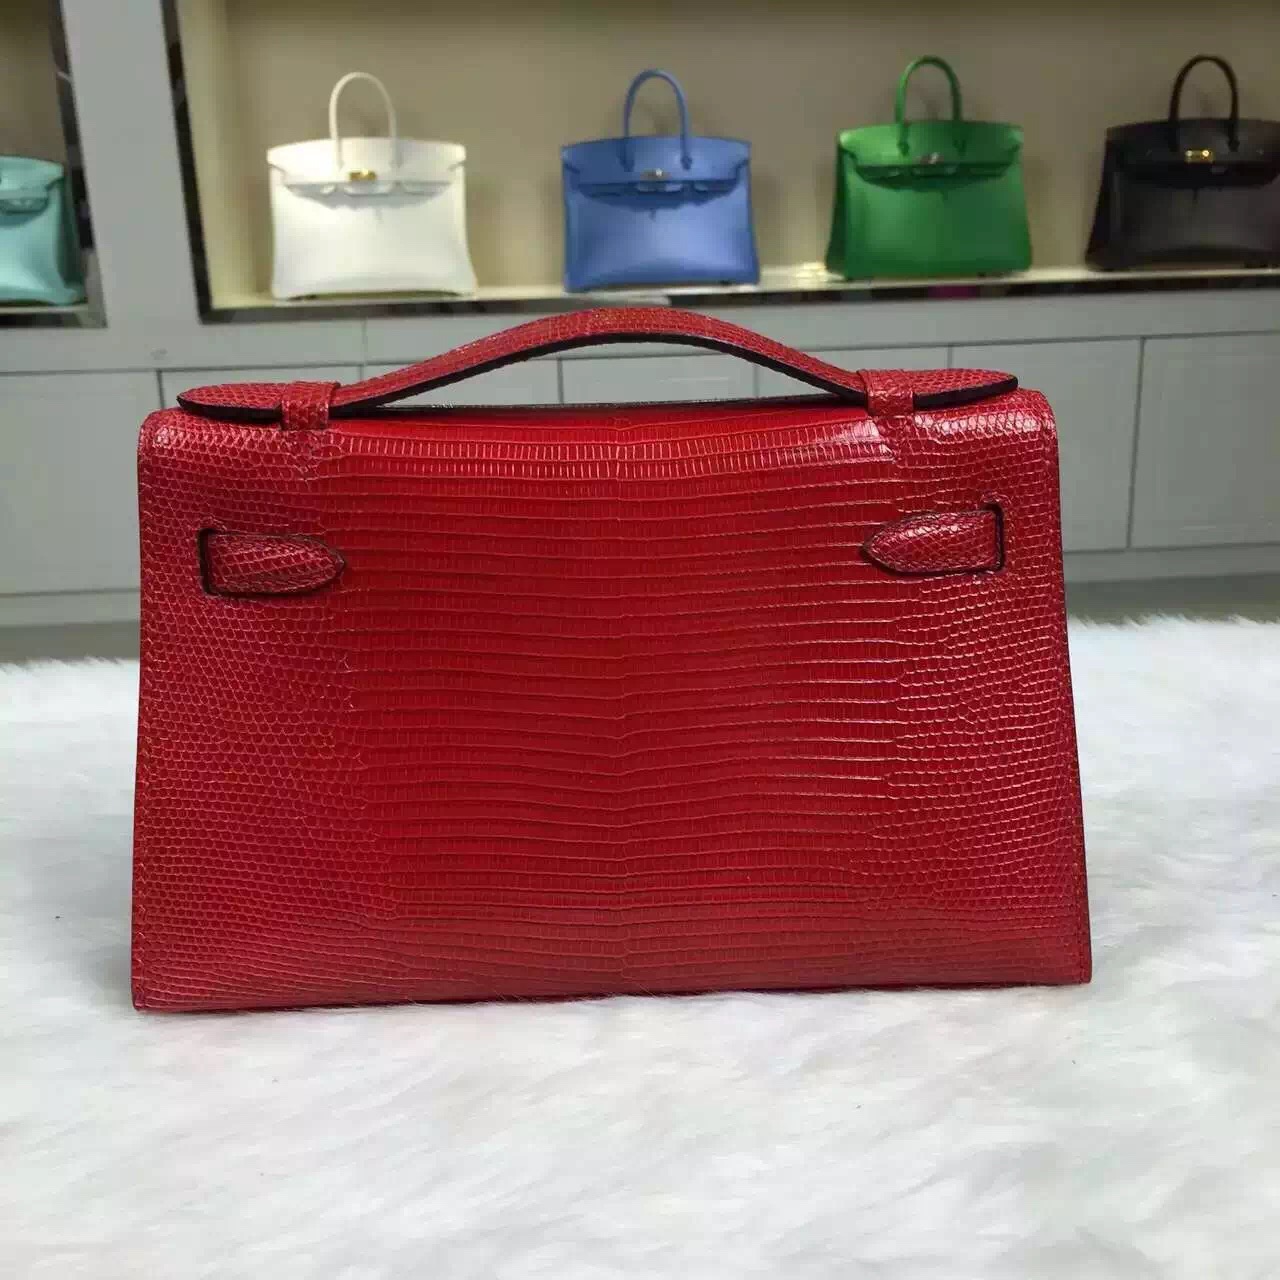 Wholesale Hermes Lizard Skin Leather Mini Kelly Pochette Clutch Bag in Chinese Red 22CM